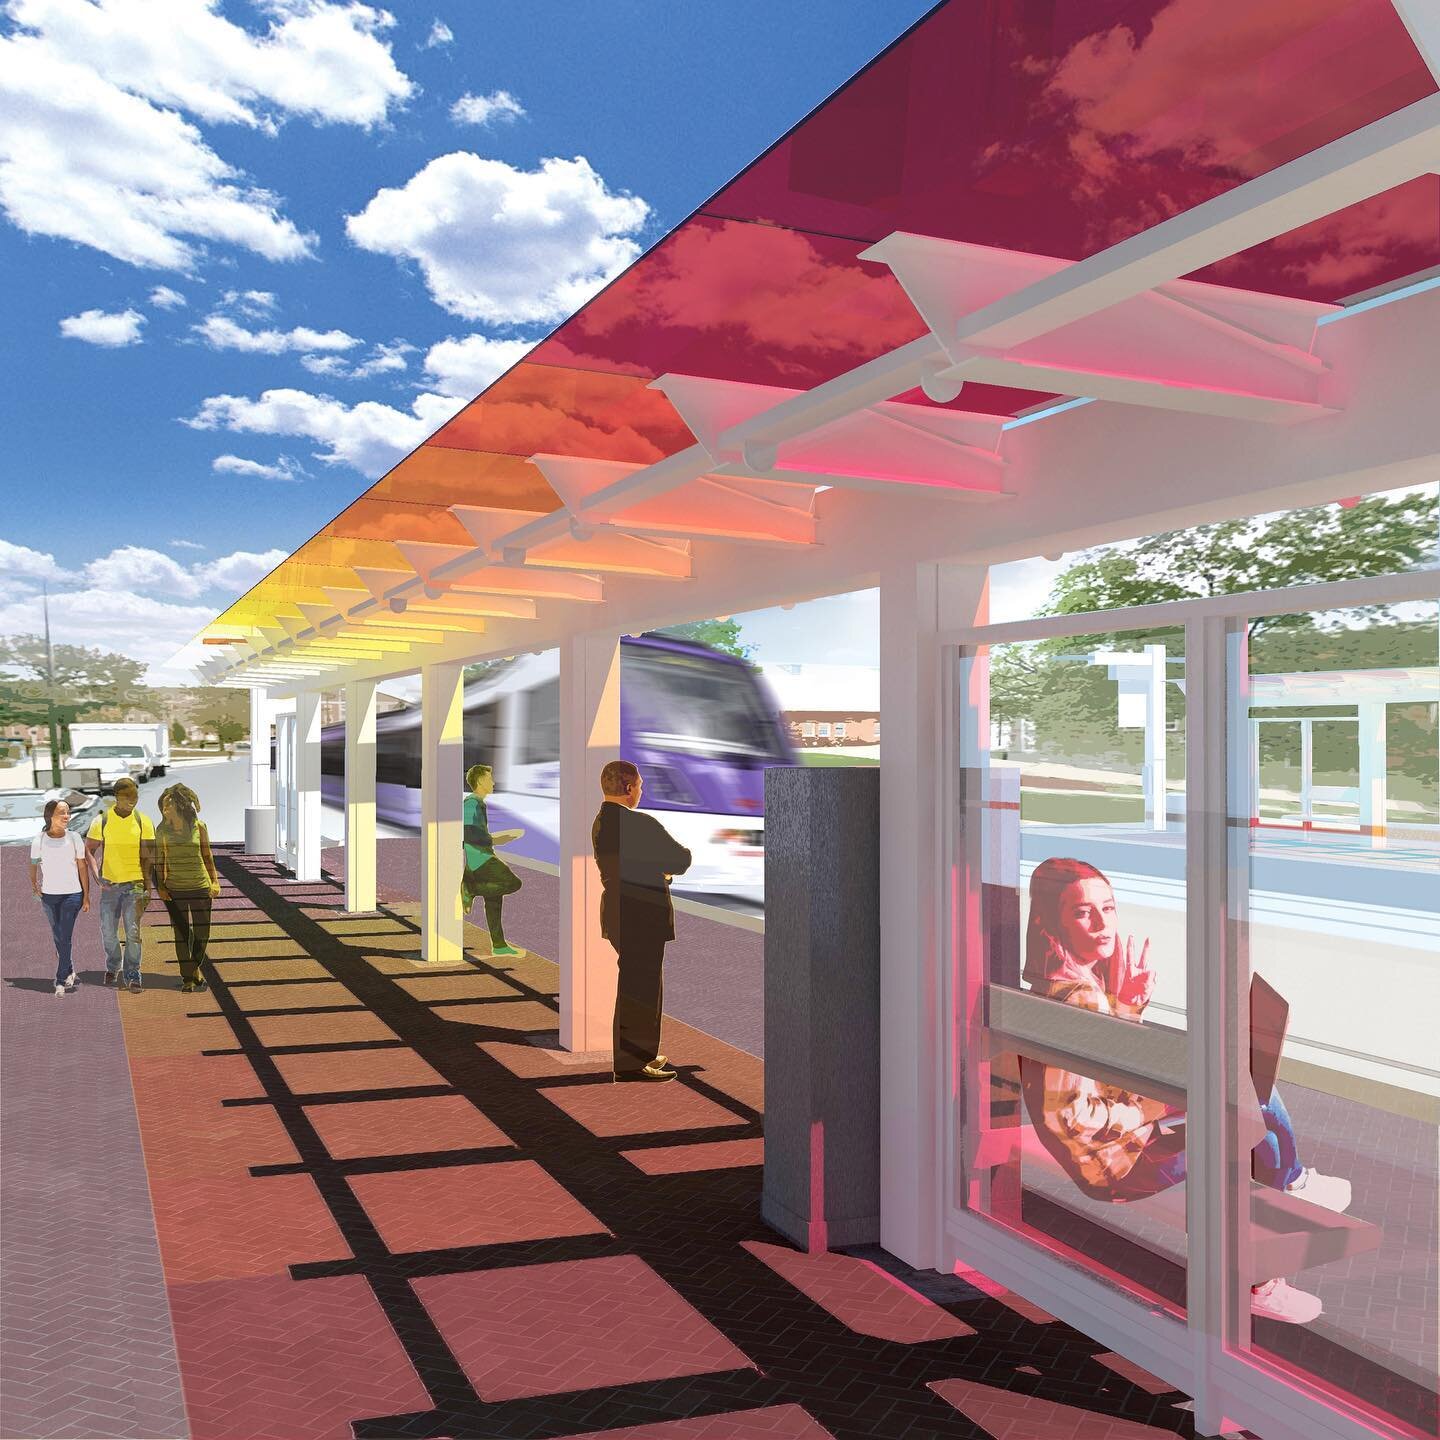 CHROMAZONE. A project for the new Purple Line Light Rail system, University of Maryland campus stop. A transforming layered glass canopy in colors of the university also serves as wayfinding on the platform. Soon to be installed. 

#purpleline #purpl